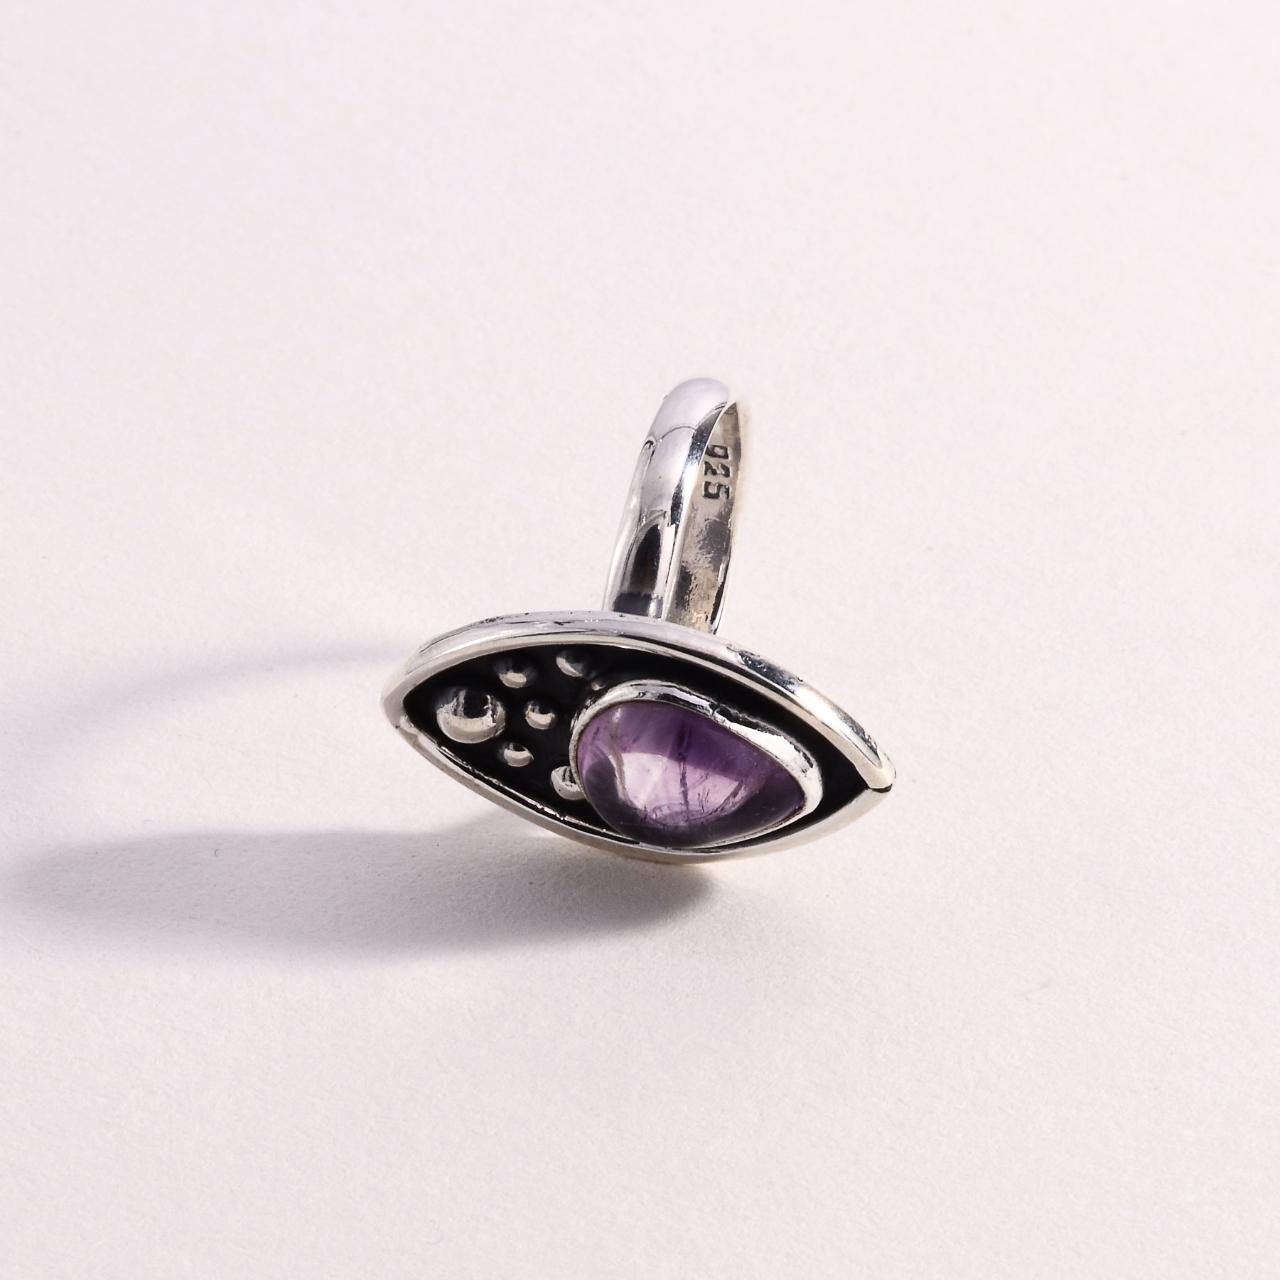 Product Image 4 - Sterling 925 Amethyst Ring

Sterling Silver

Size